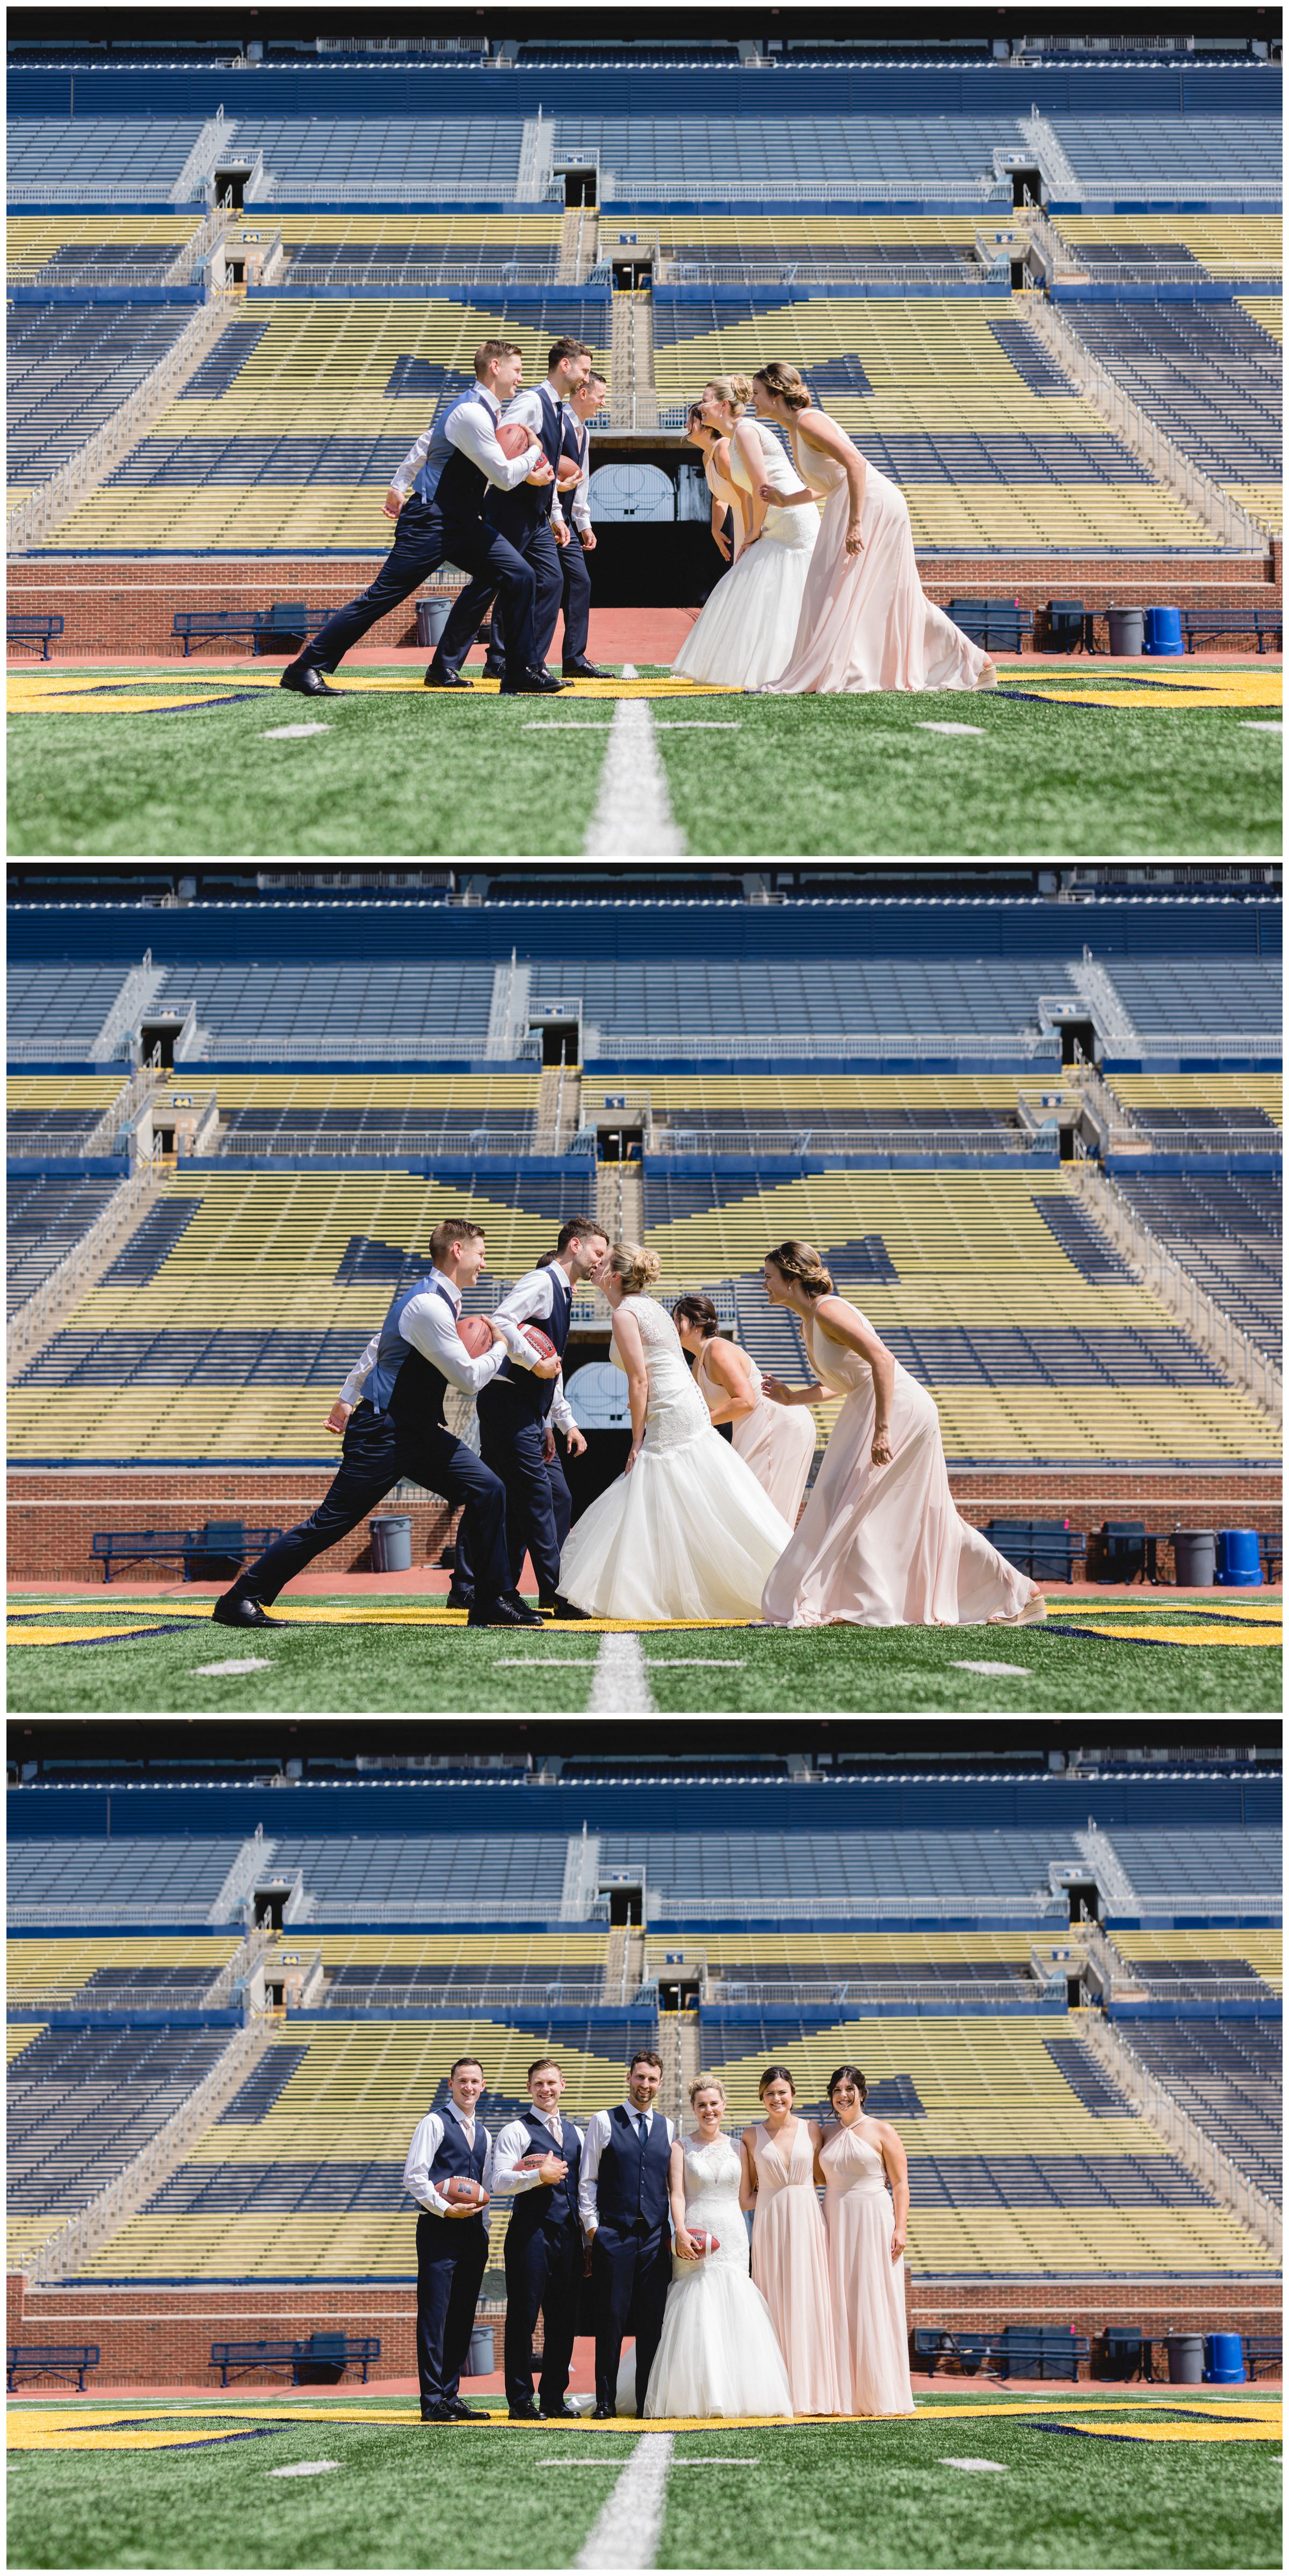 Bride and groom and the entire wedding party on the field at the Big House at the University of Michigan